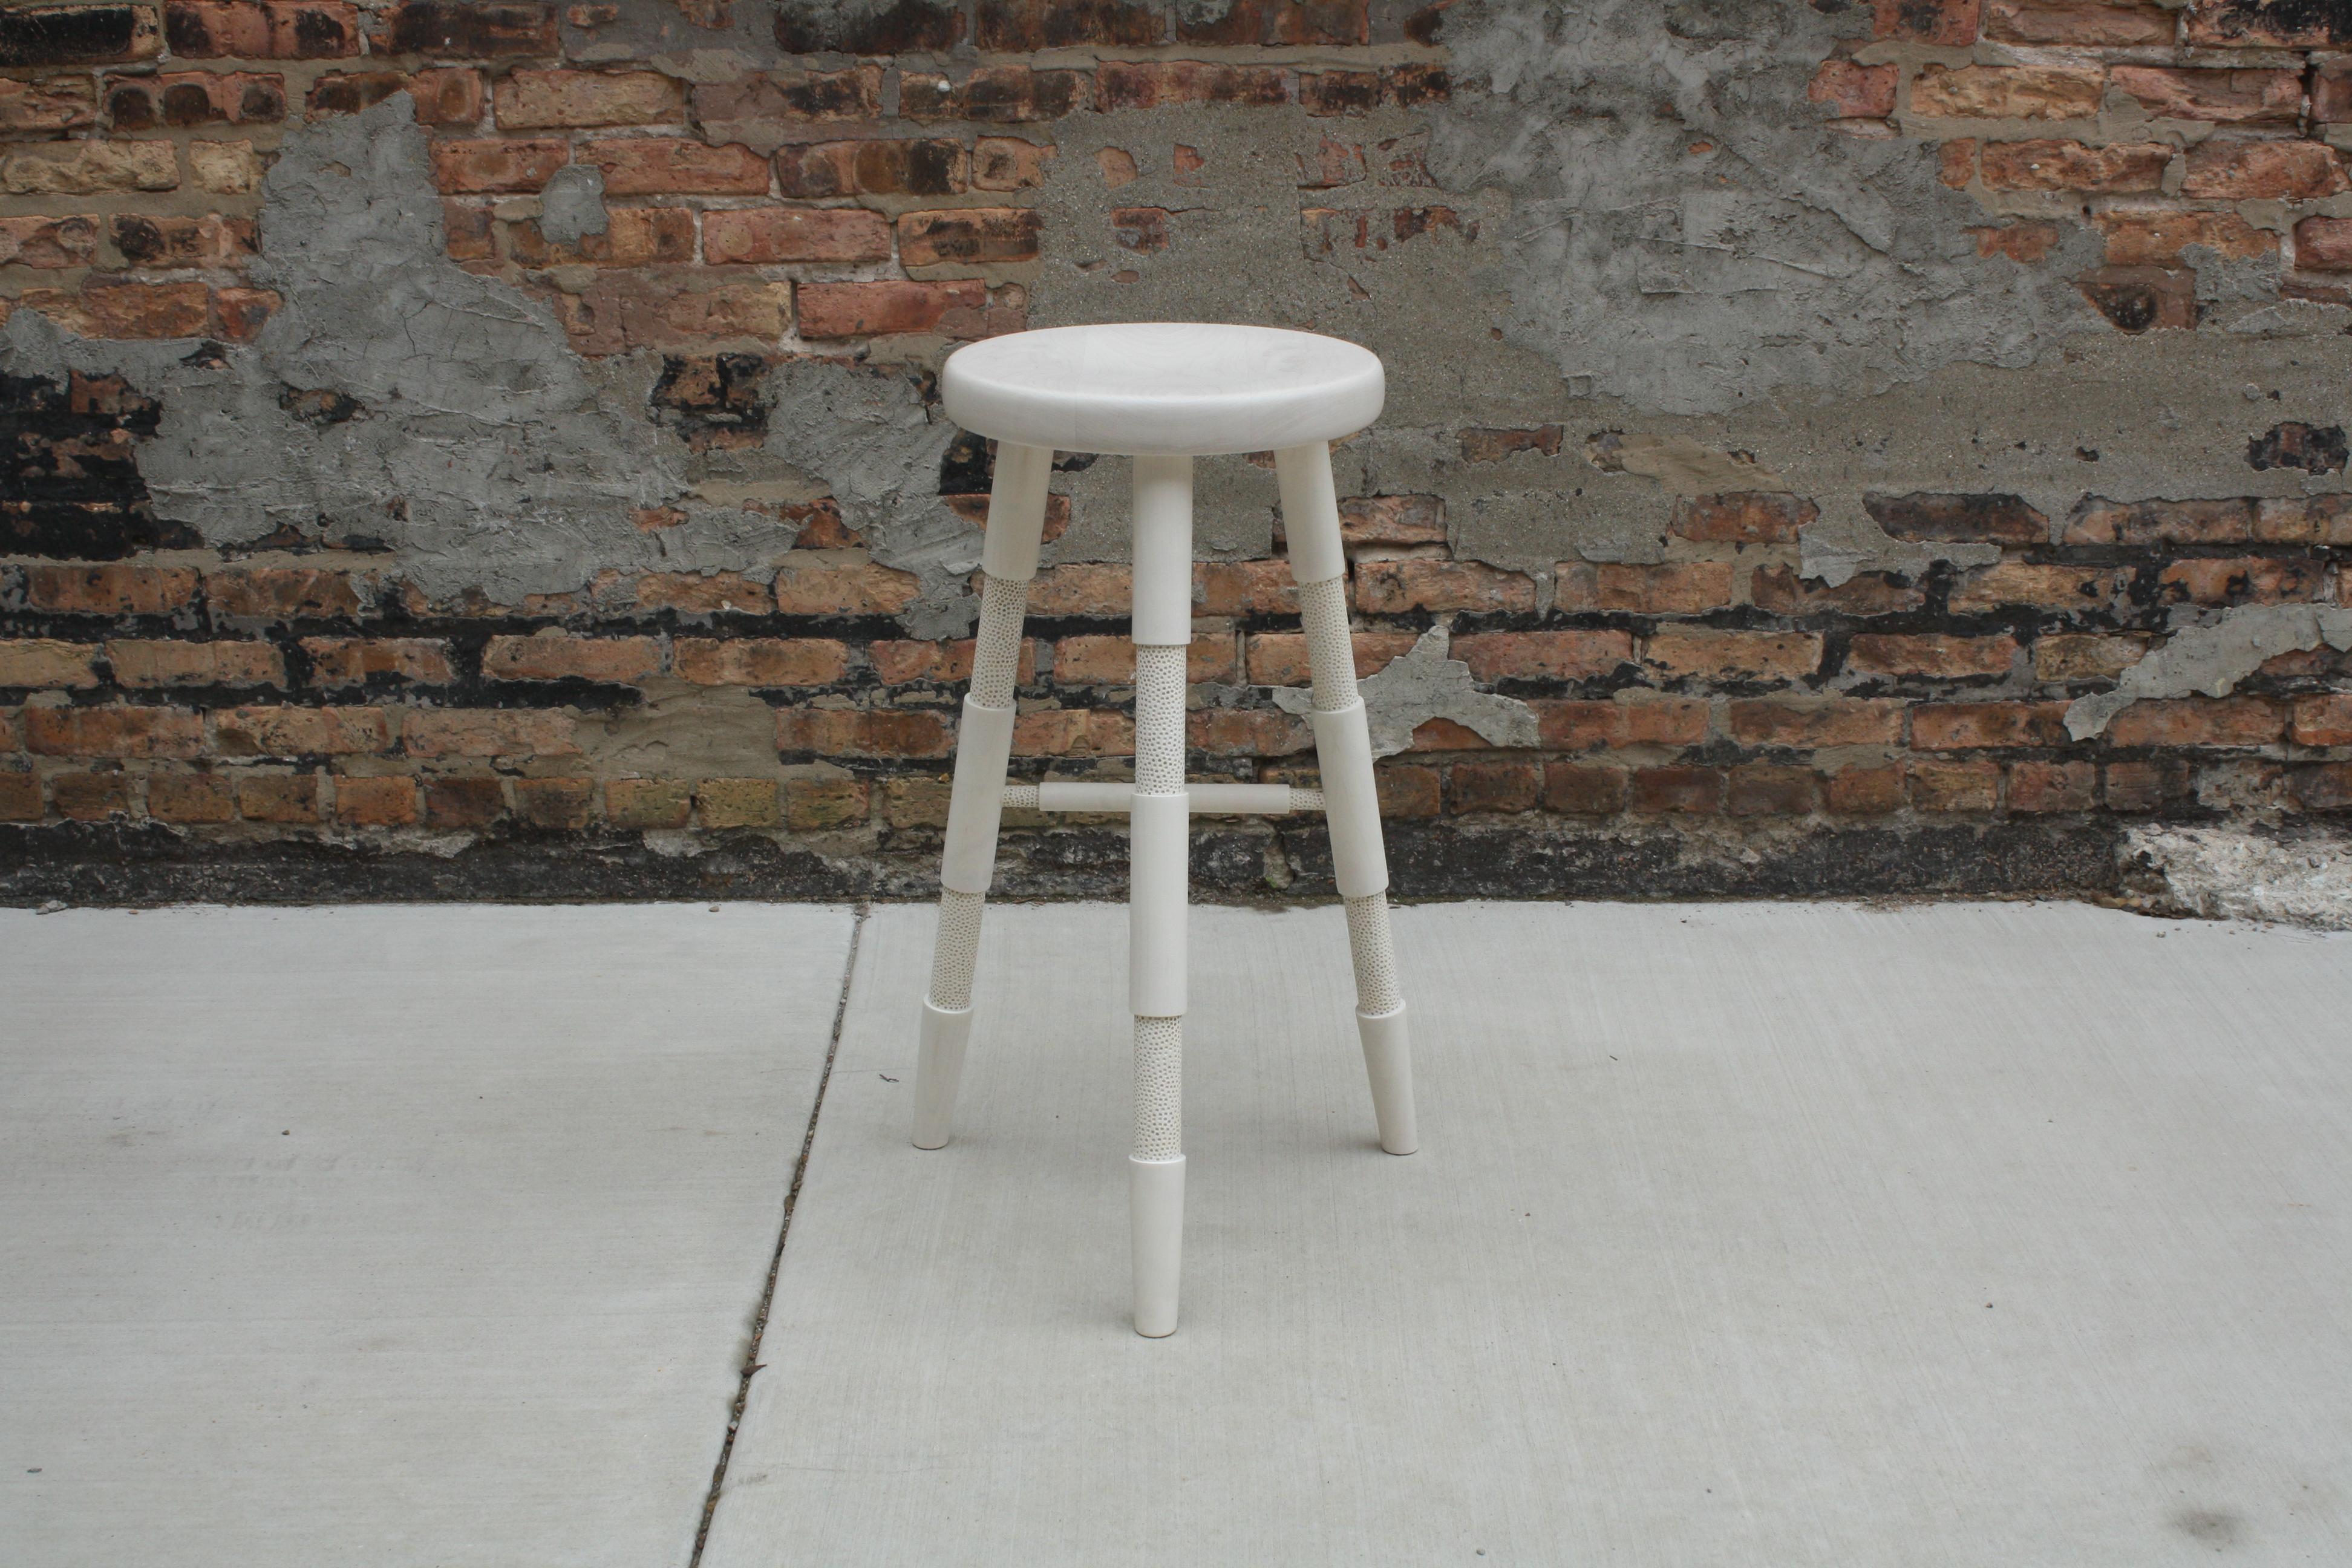 Handmade in Chicago by Laylo Studio, this solid wood stool features lathe-turned and textured legs that are joined to the hand-carved seat using through wedged, tapered tenons - a tried and true method of joinery found in Windsor chairs - which are